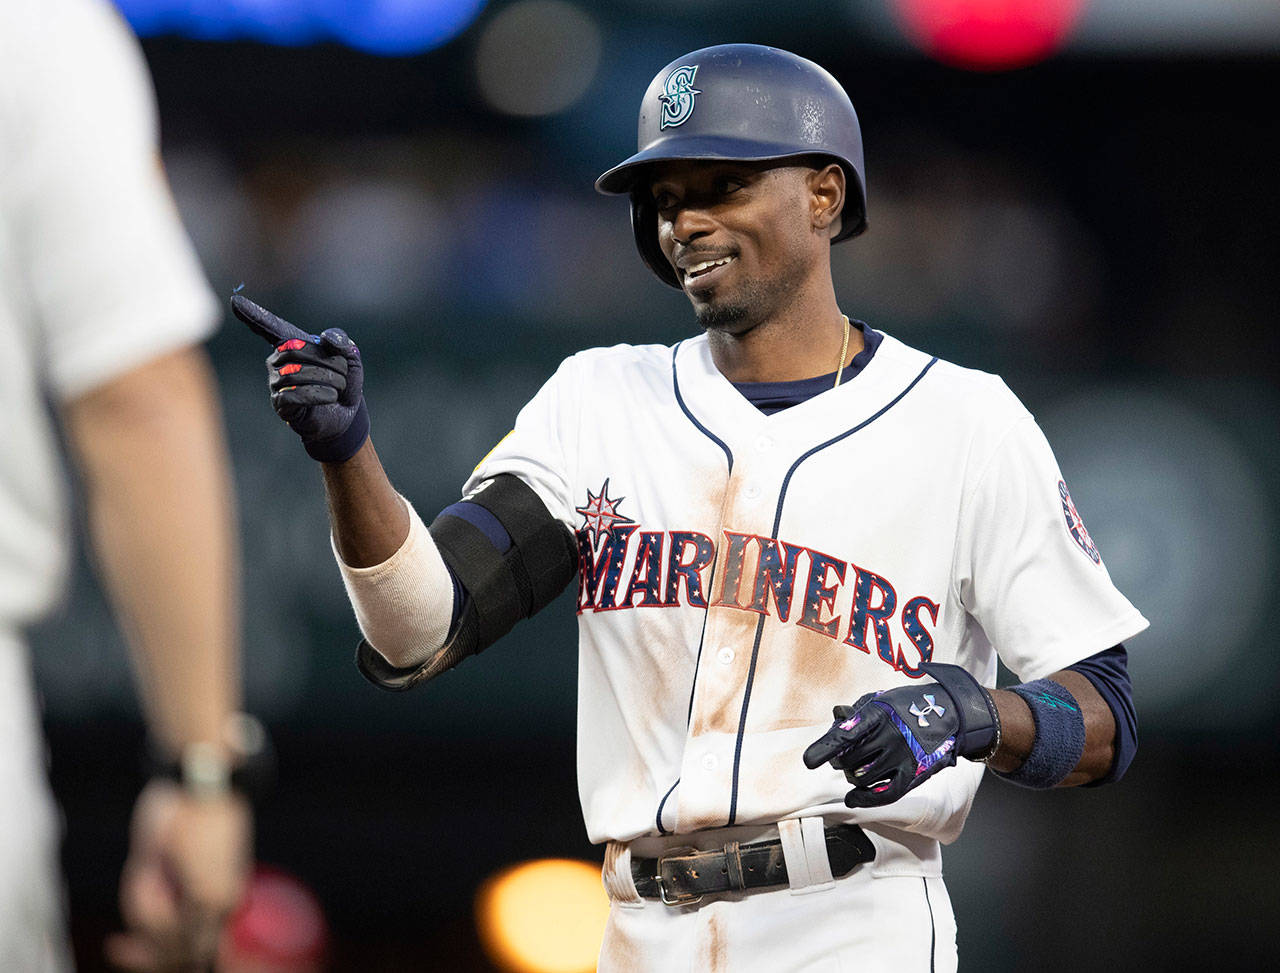 The Mariners’ Dee Gordon gestures to the dugout after hitting a single during a game against the Angels on July 3, 2018, in Seattle. (AP Photo/Stephen Brashear)